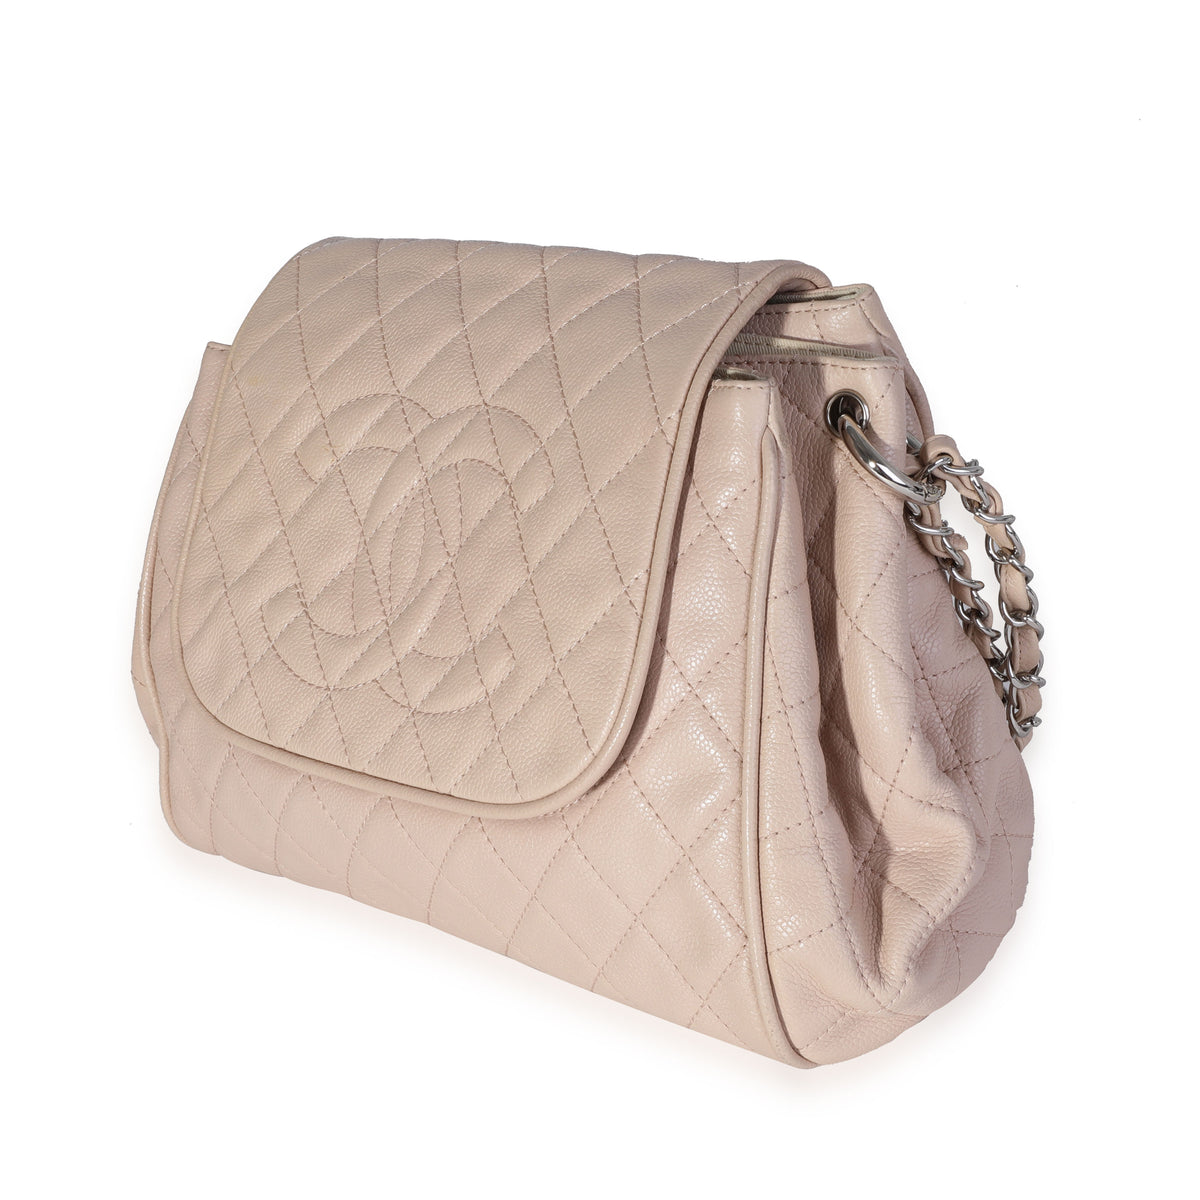 Chanel Beige Quilted Caviar Timeless Accordion Flap